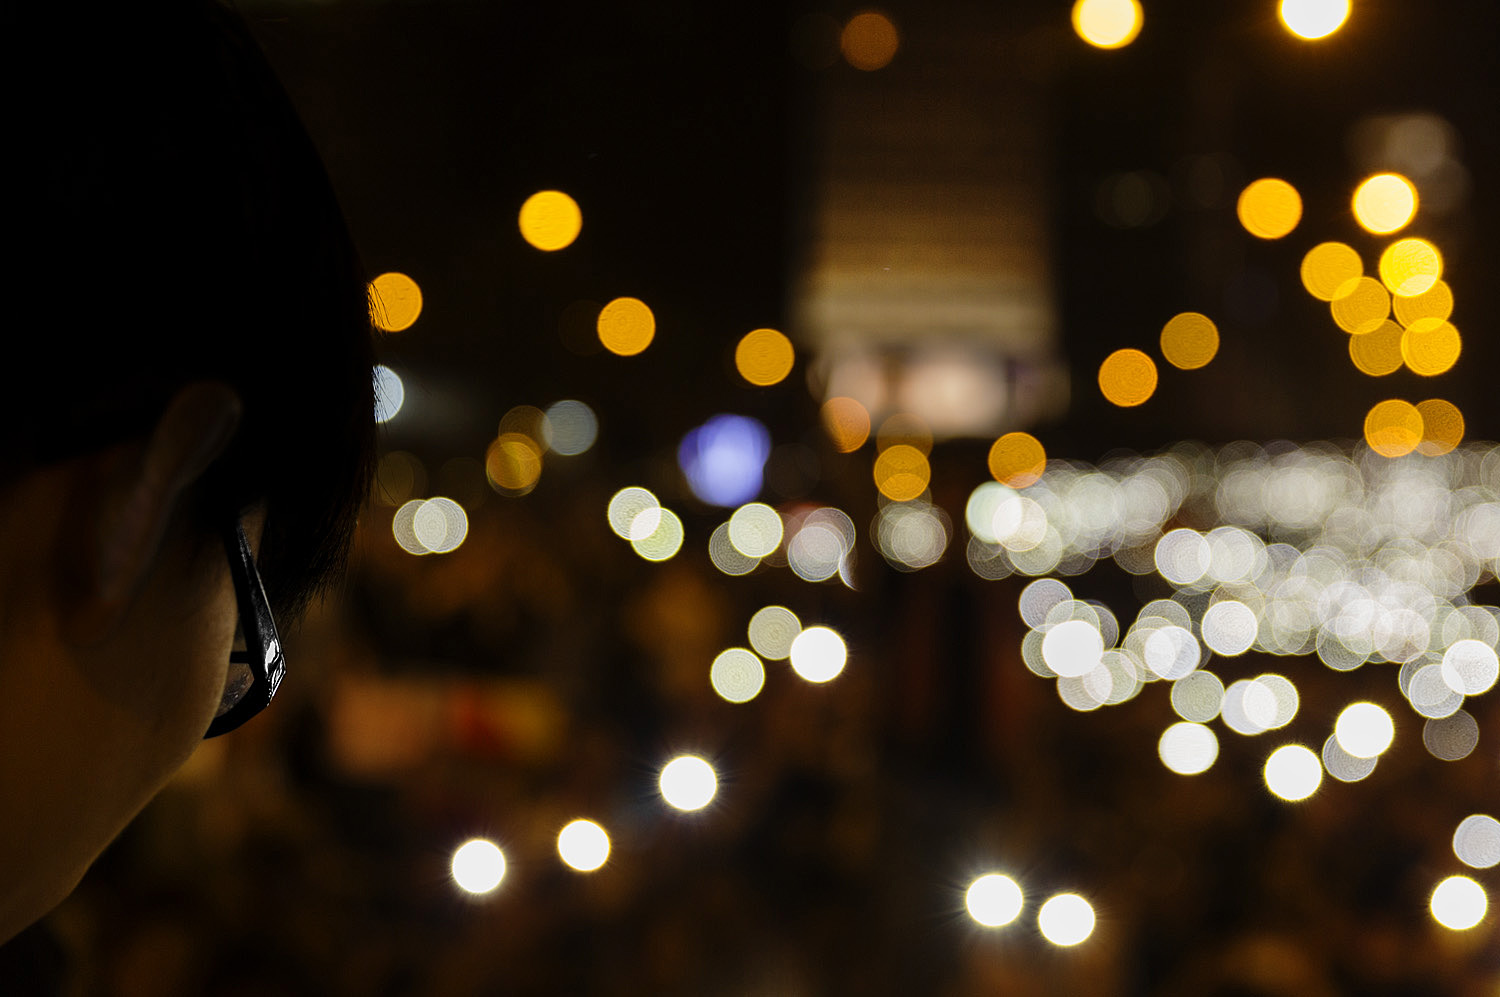 Teenager Joshua Wong, the leader for Hong Kong’s protest movement, looks out over a crowd of people waving their cell phones.